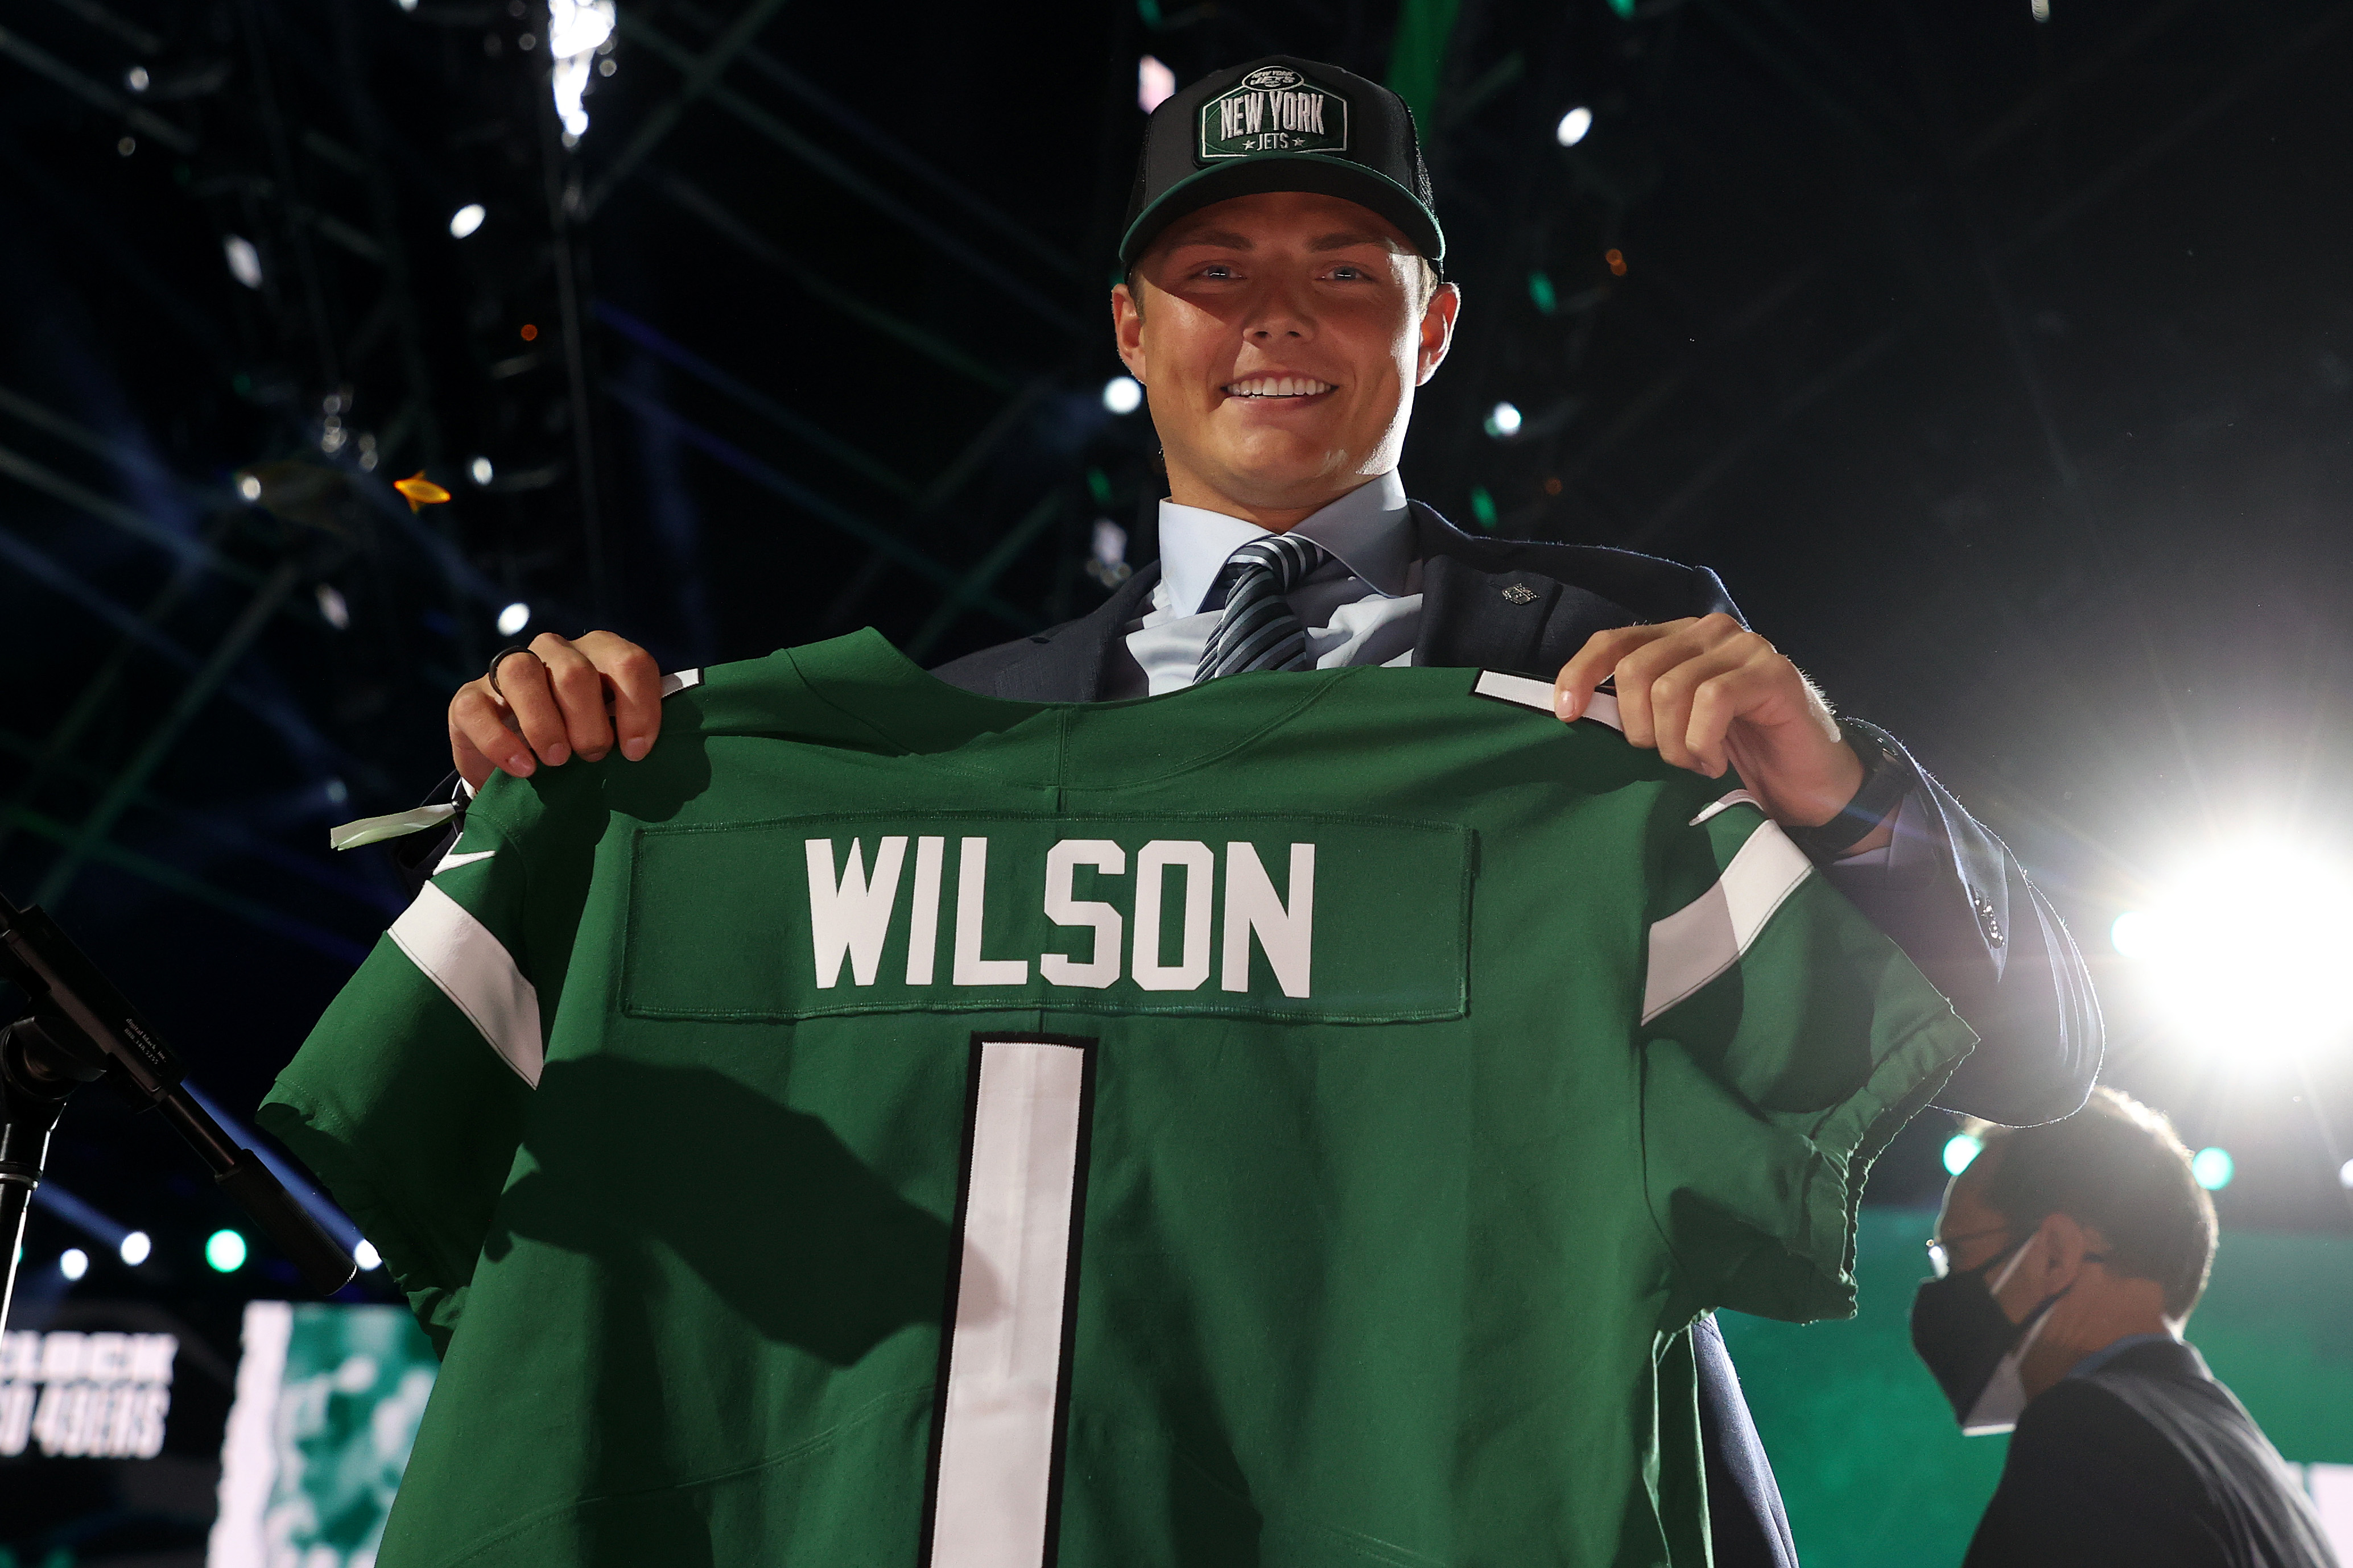 Zach Wilson Says The Jets’ Starting QB Job “Must Be Earned”